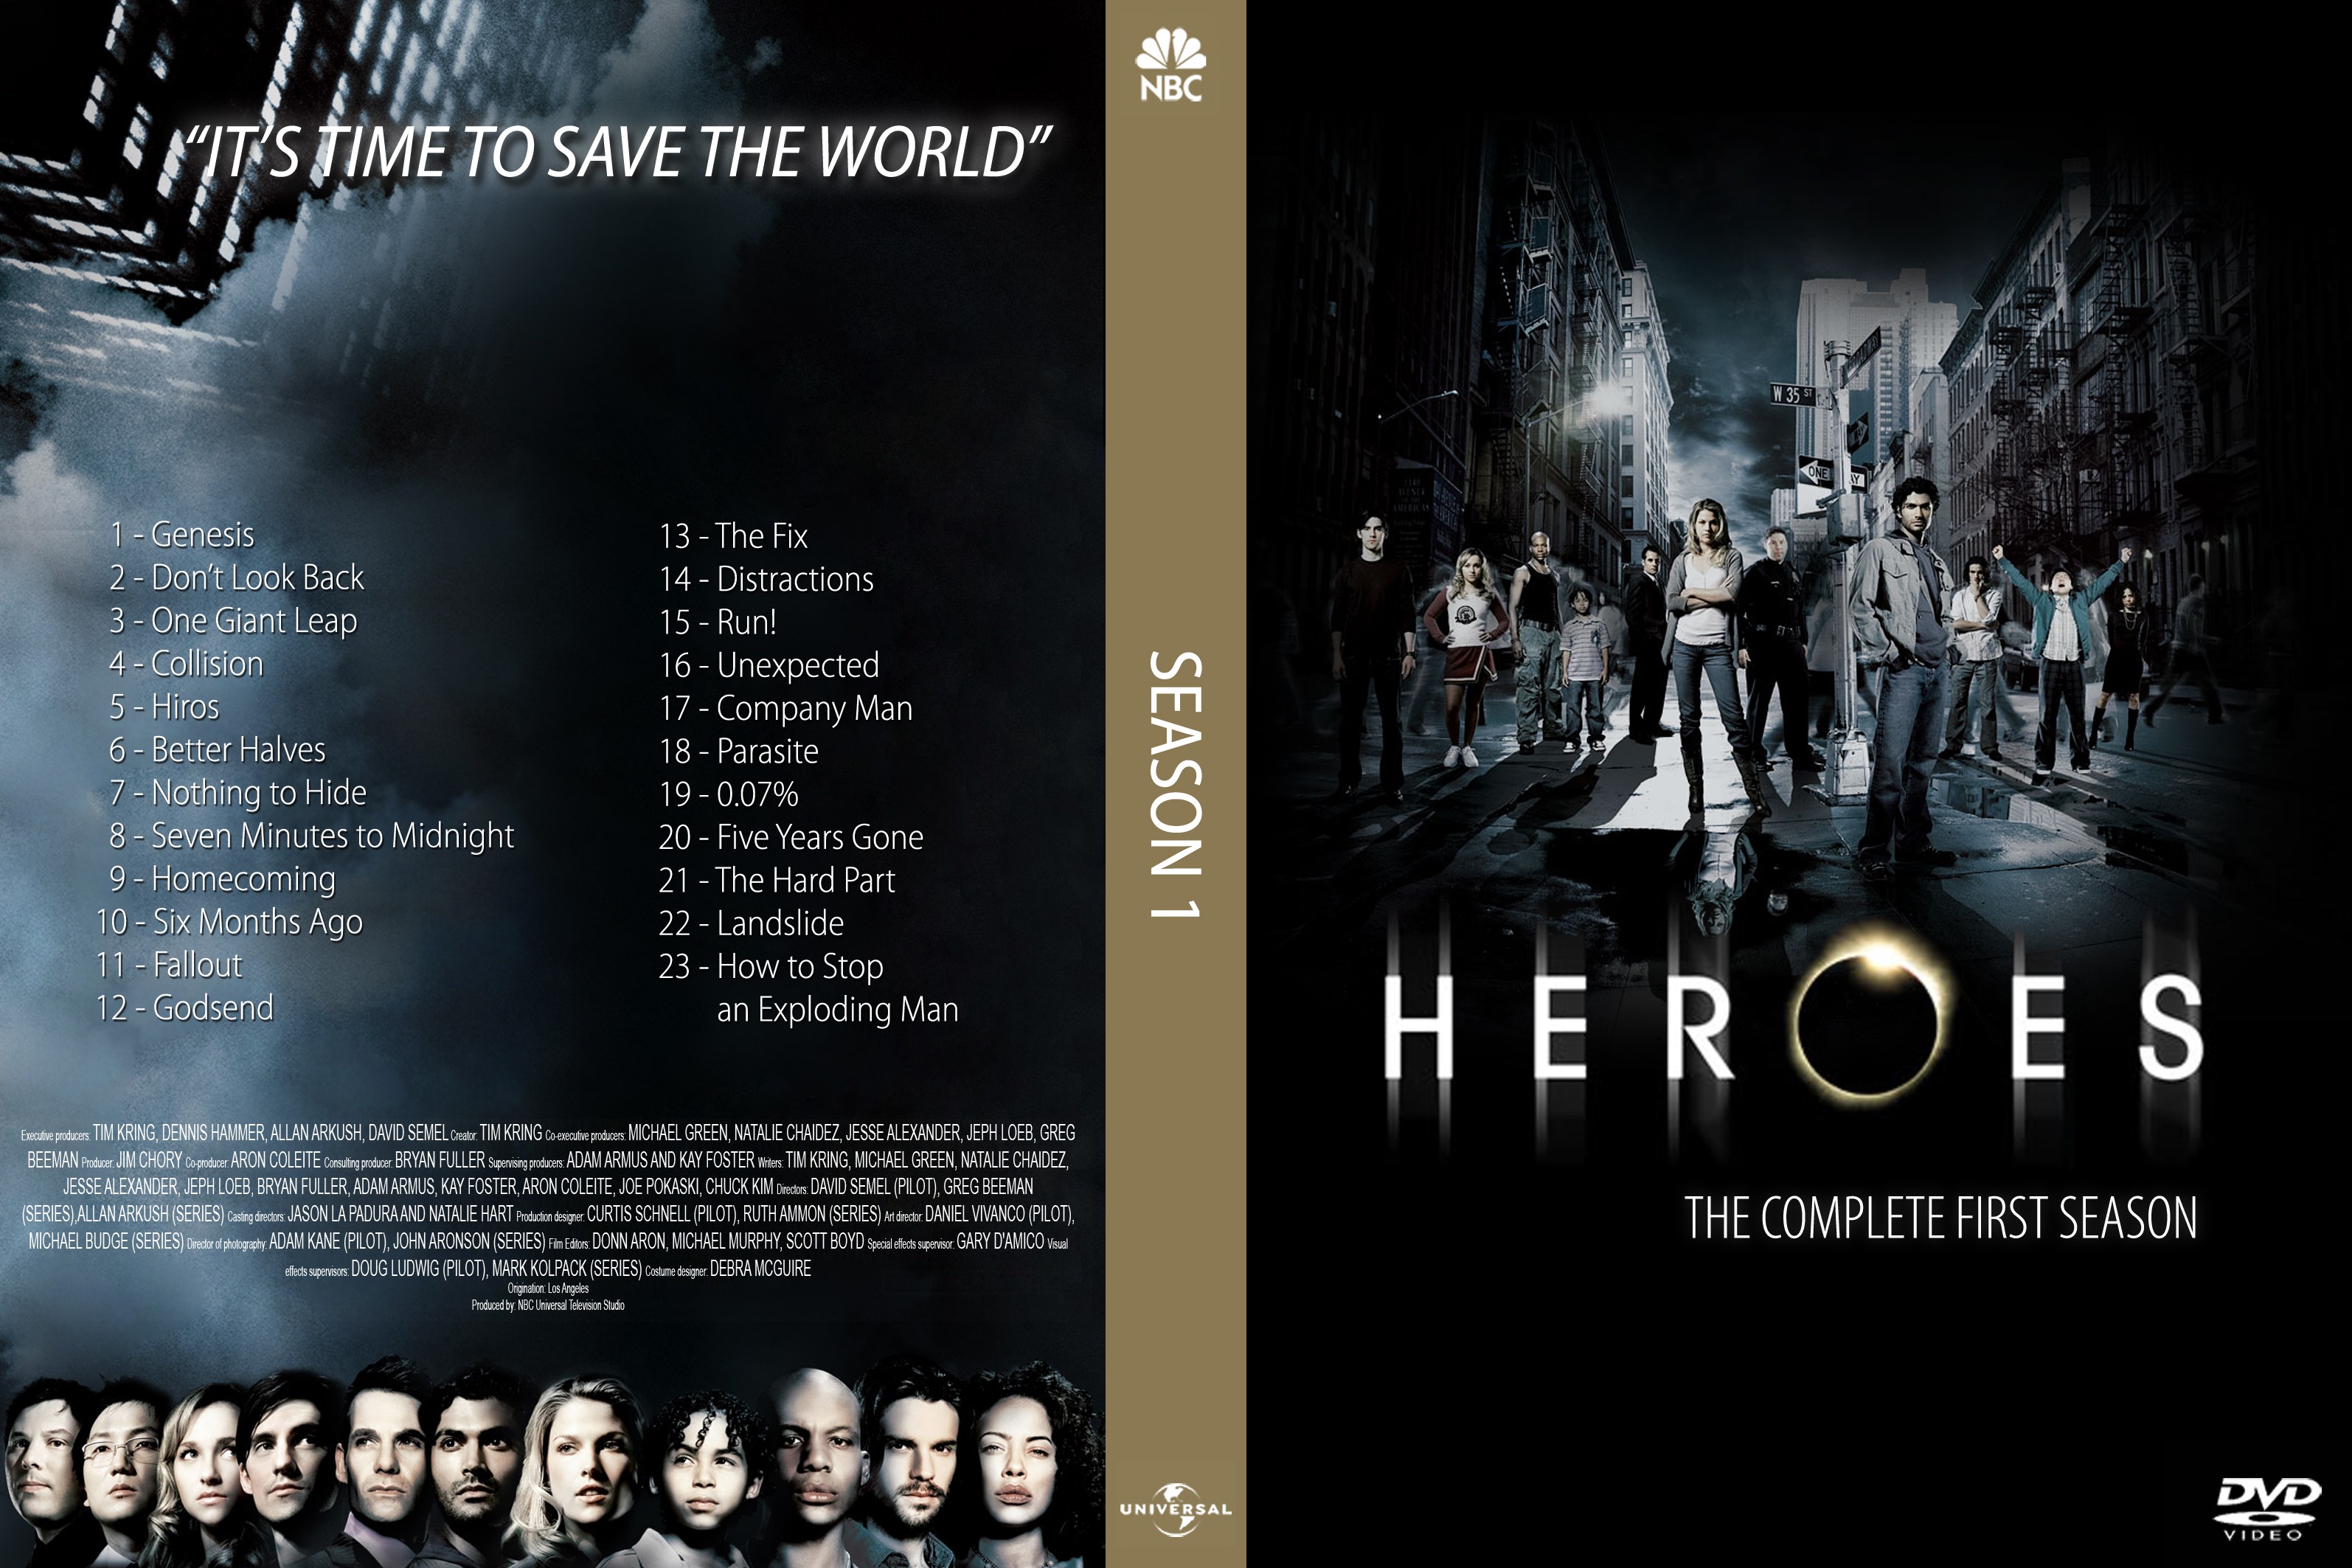 Heroes - The Complete First Season